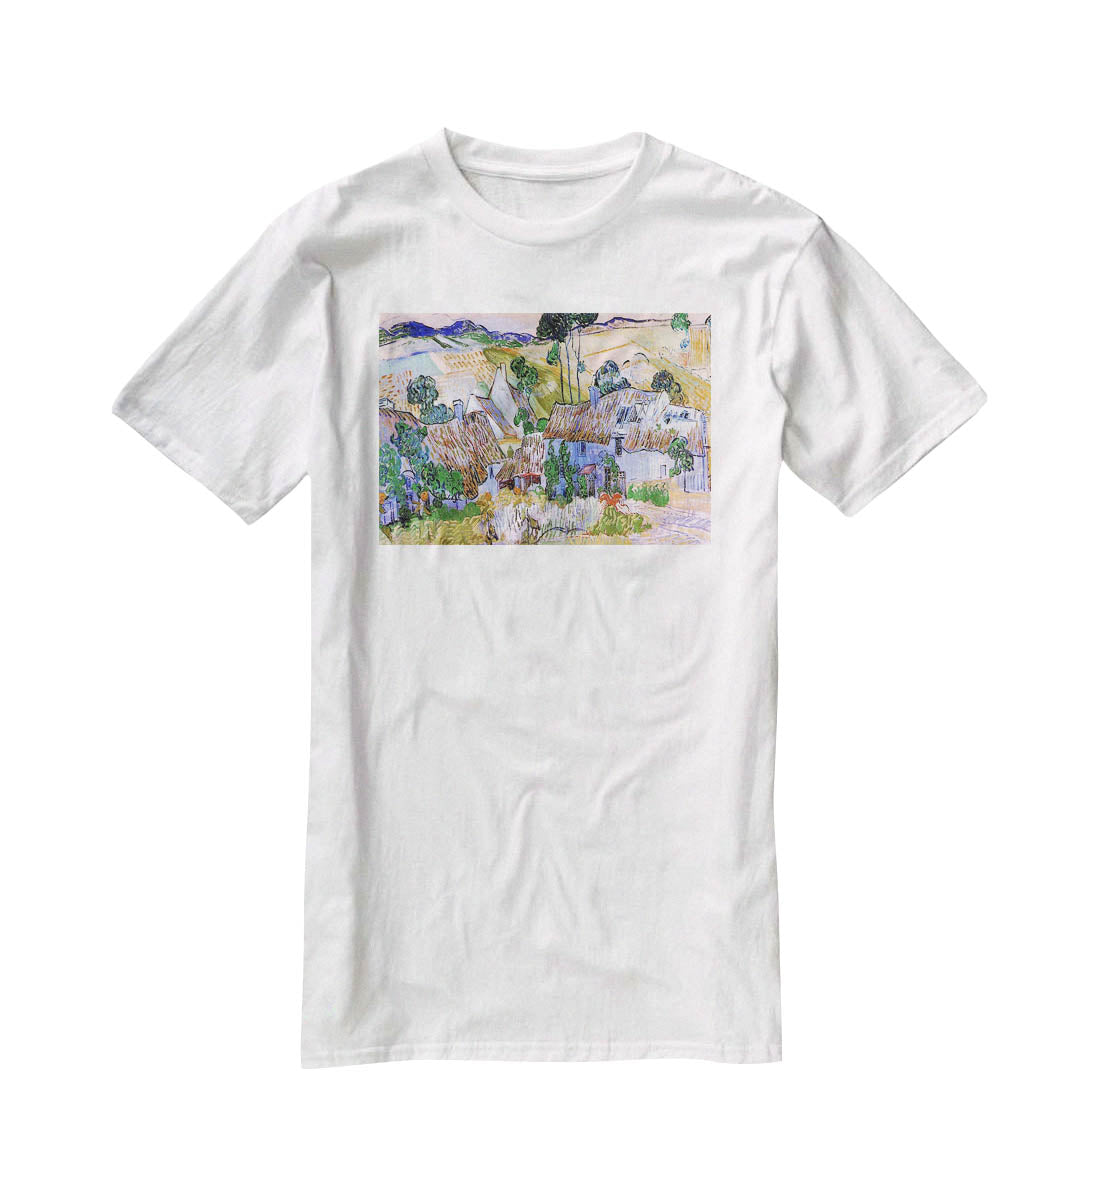 Thatched Cottages by a Hill by Van Gogh T-Shirt - Canvas Art Rocks - 5